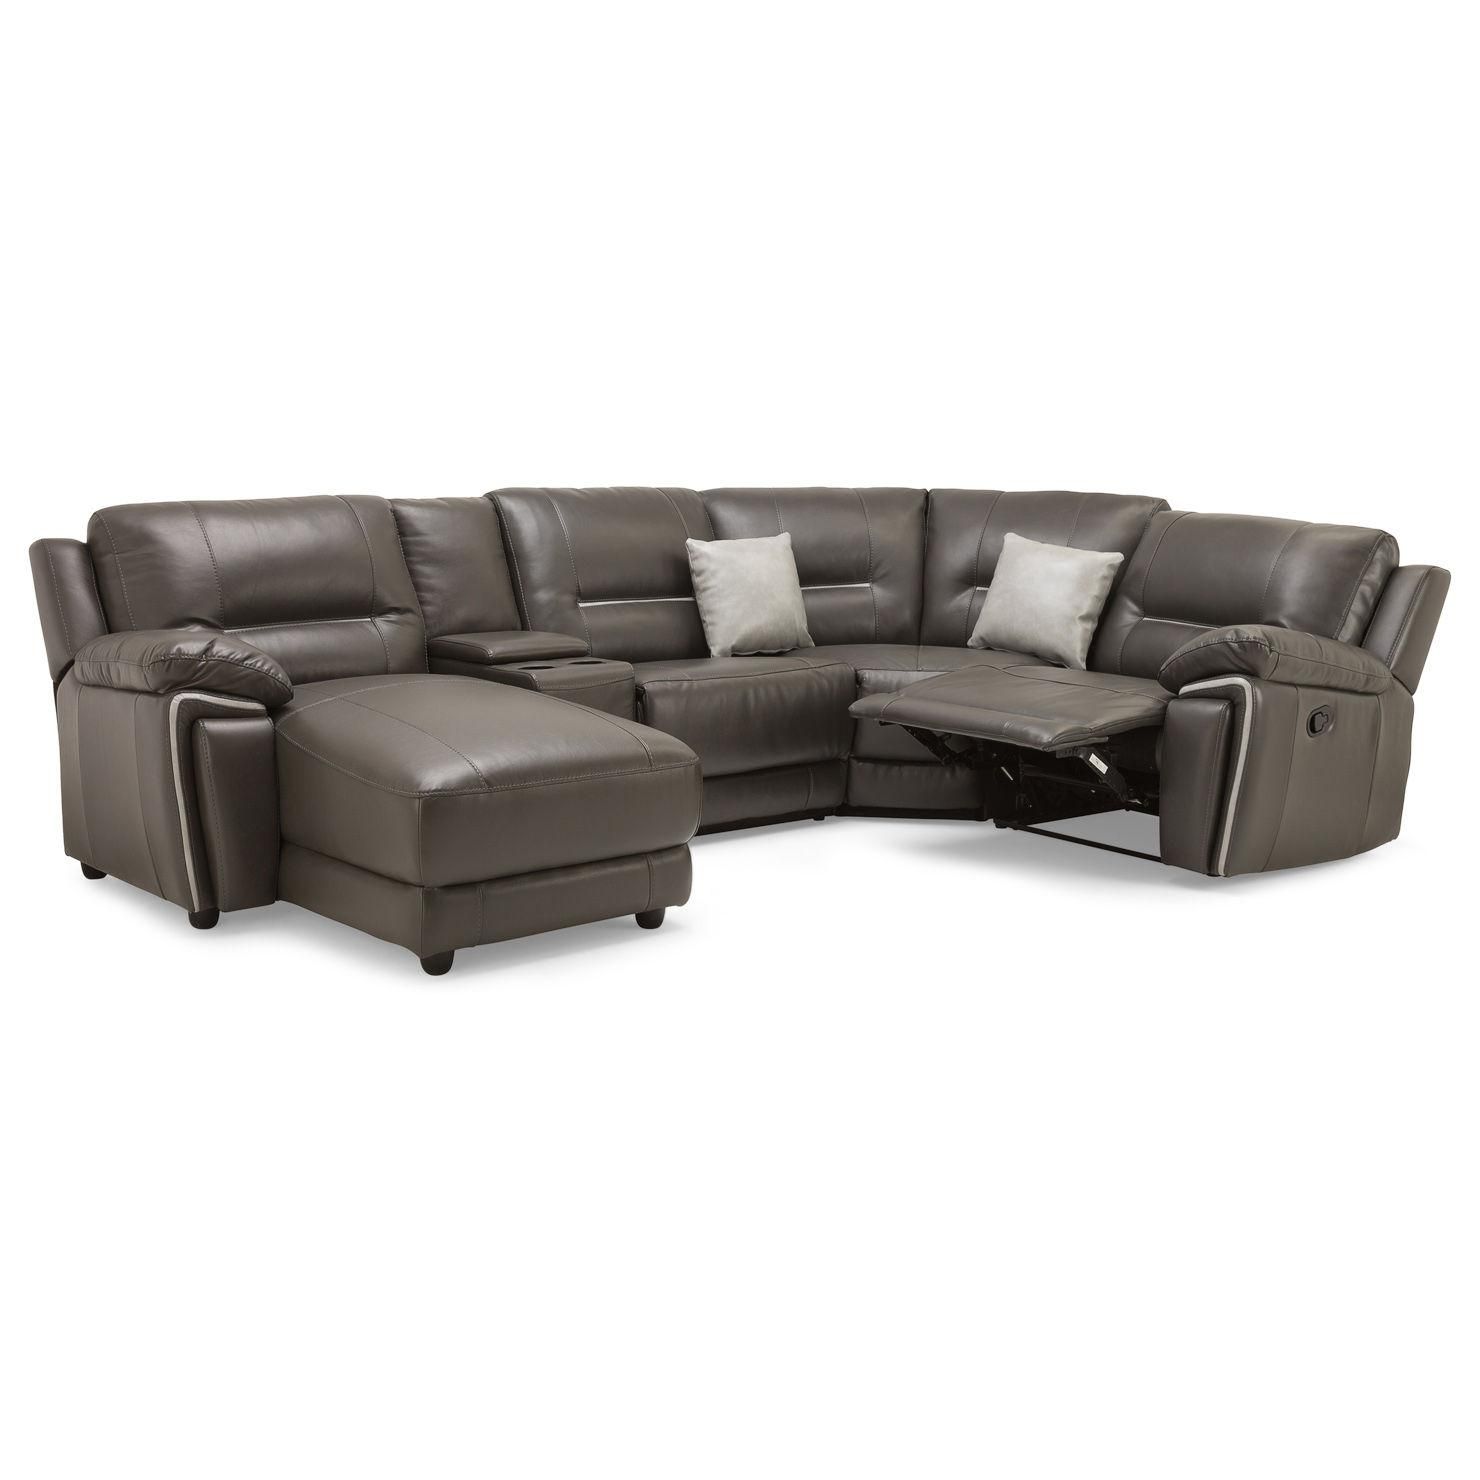 Henry Electric Leather Air Reclining Corner Sofa – Next Day With Electric Sofa Beds (View 14 of 20)